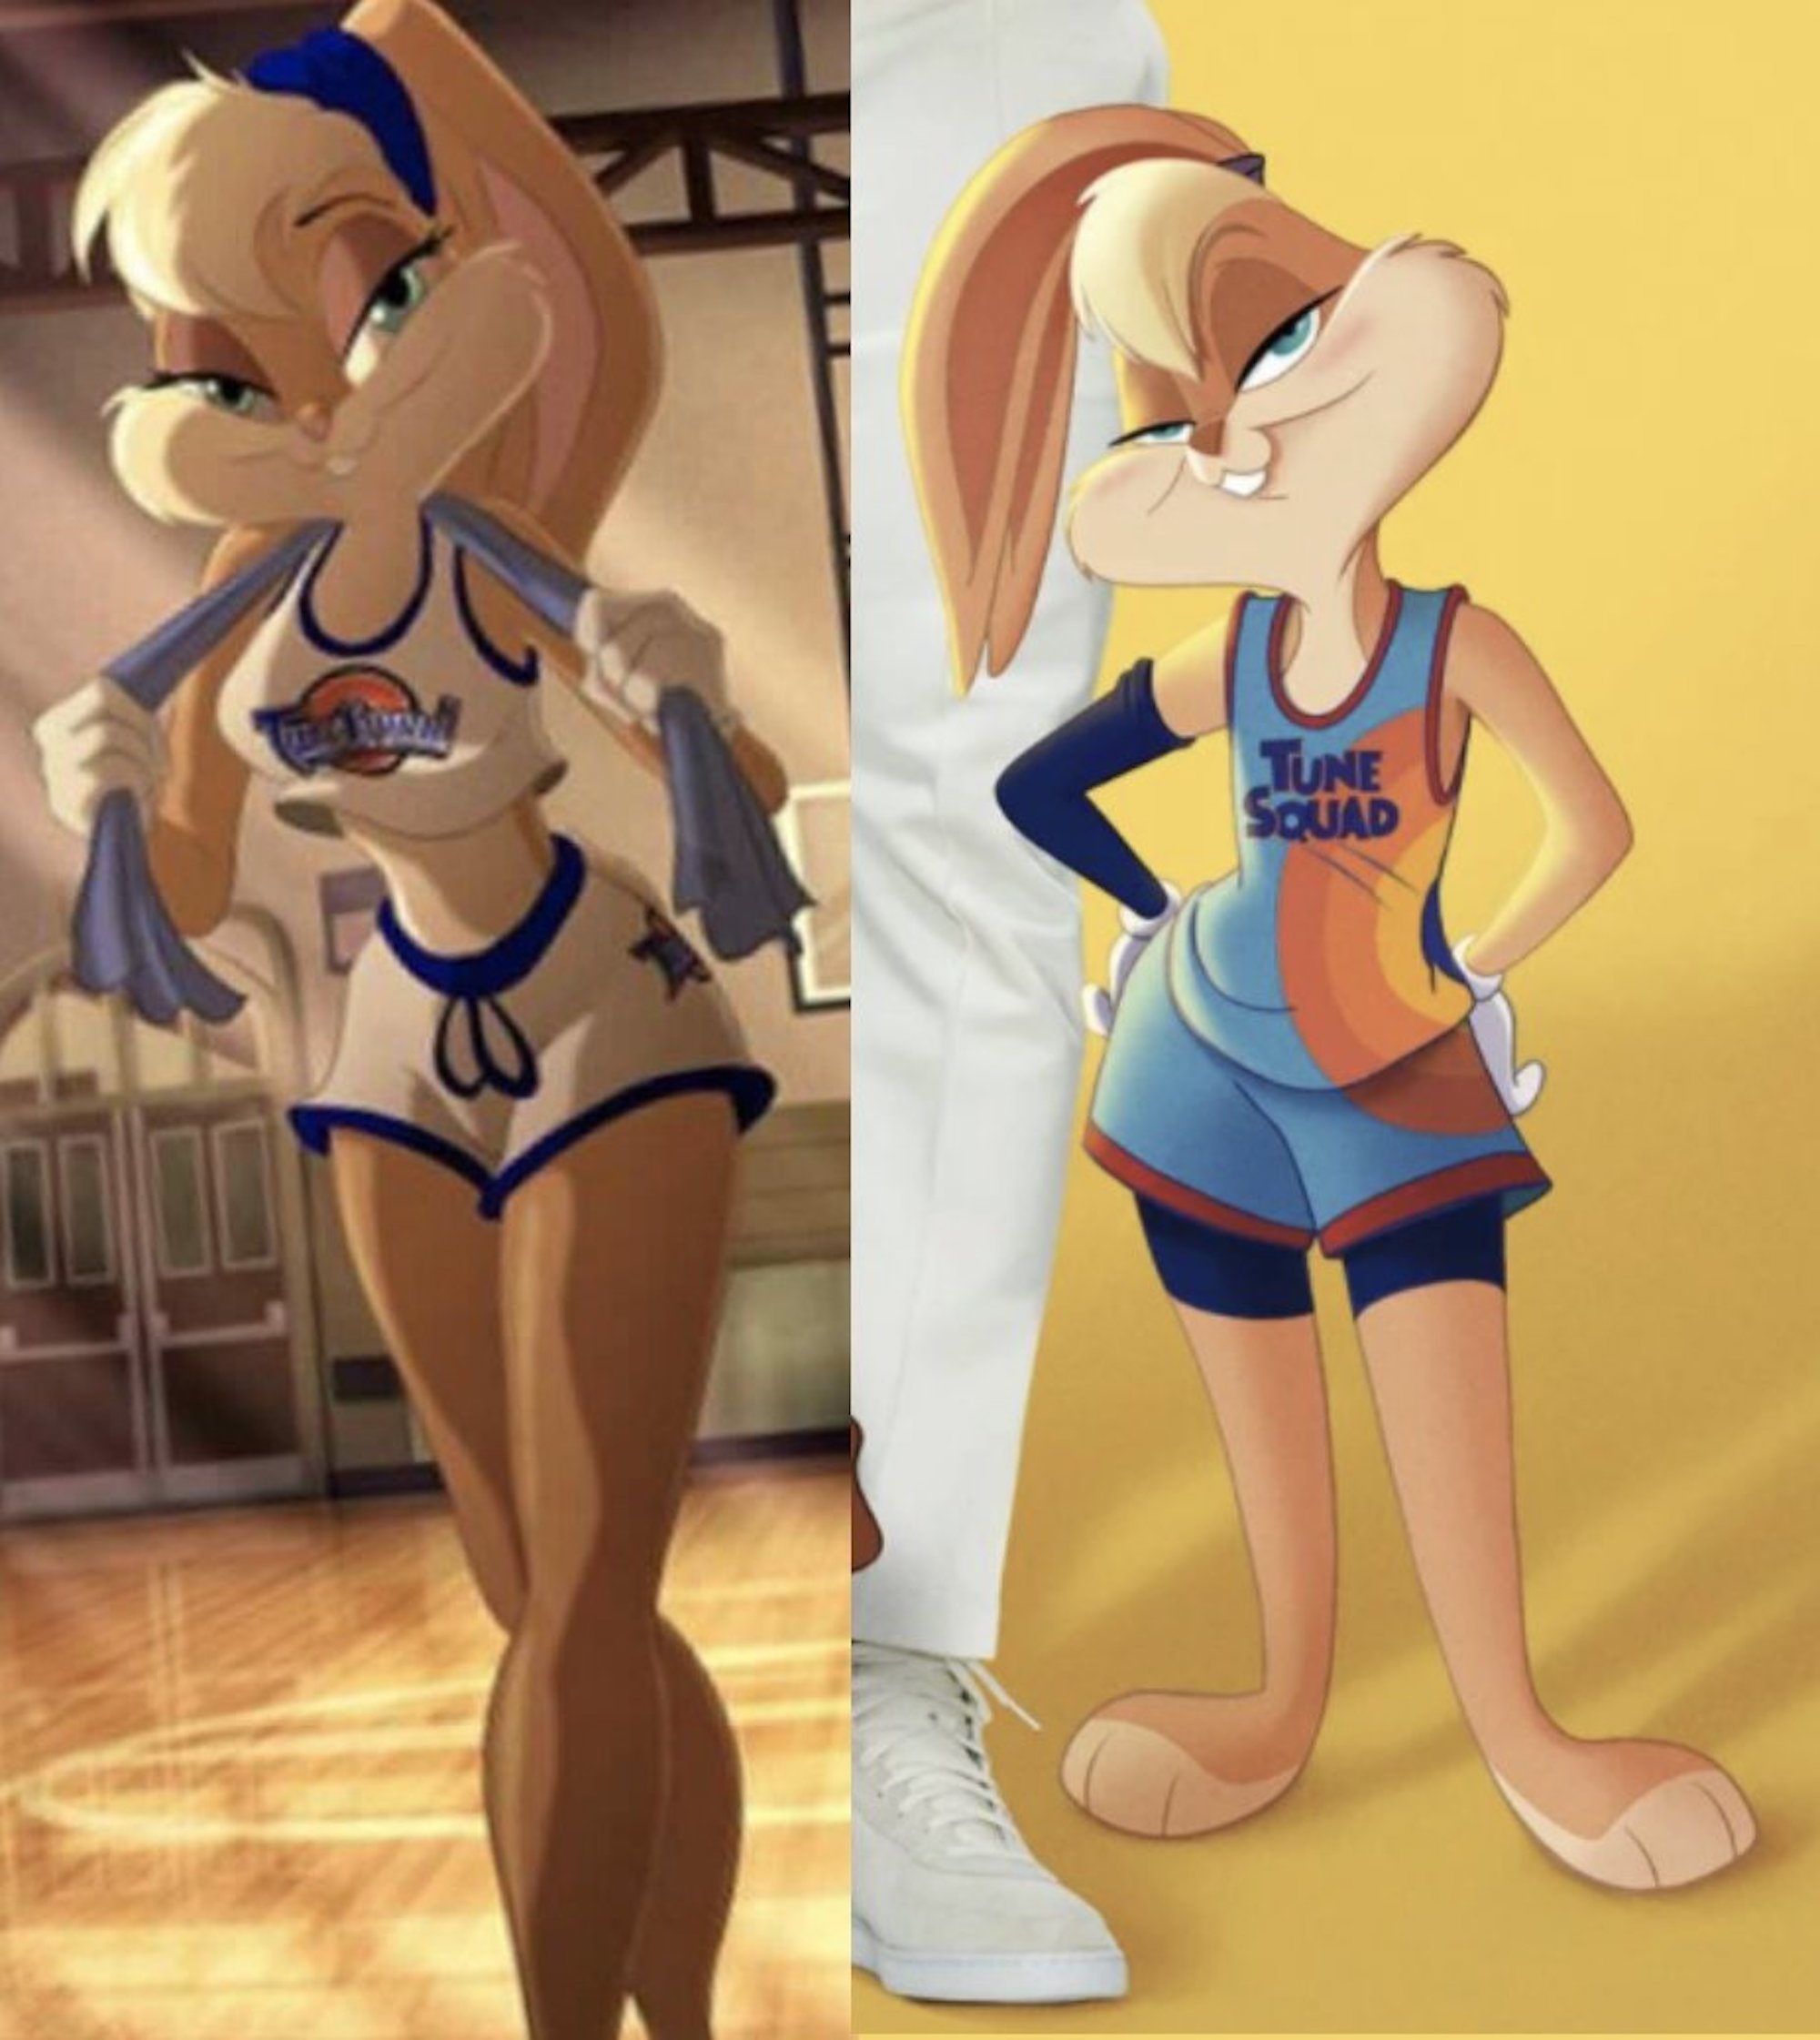 People Really Want to Have Sex With Lola Bunny From Space Jam